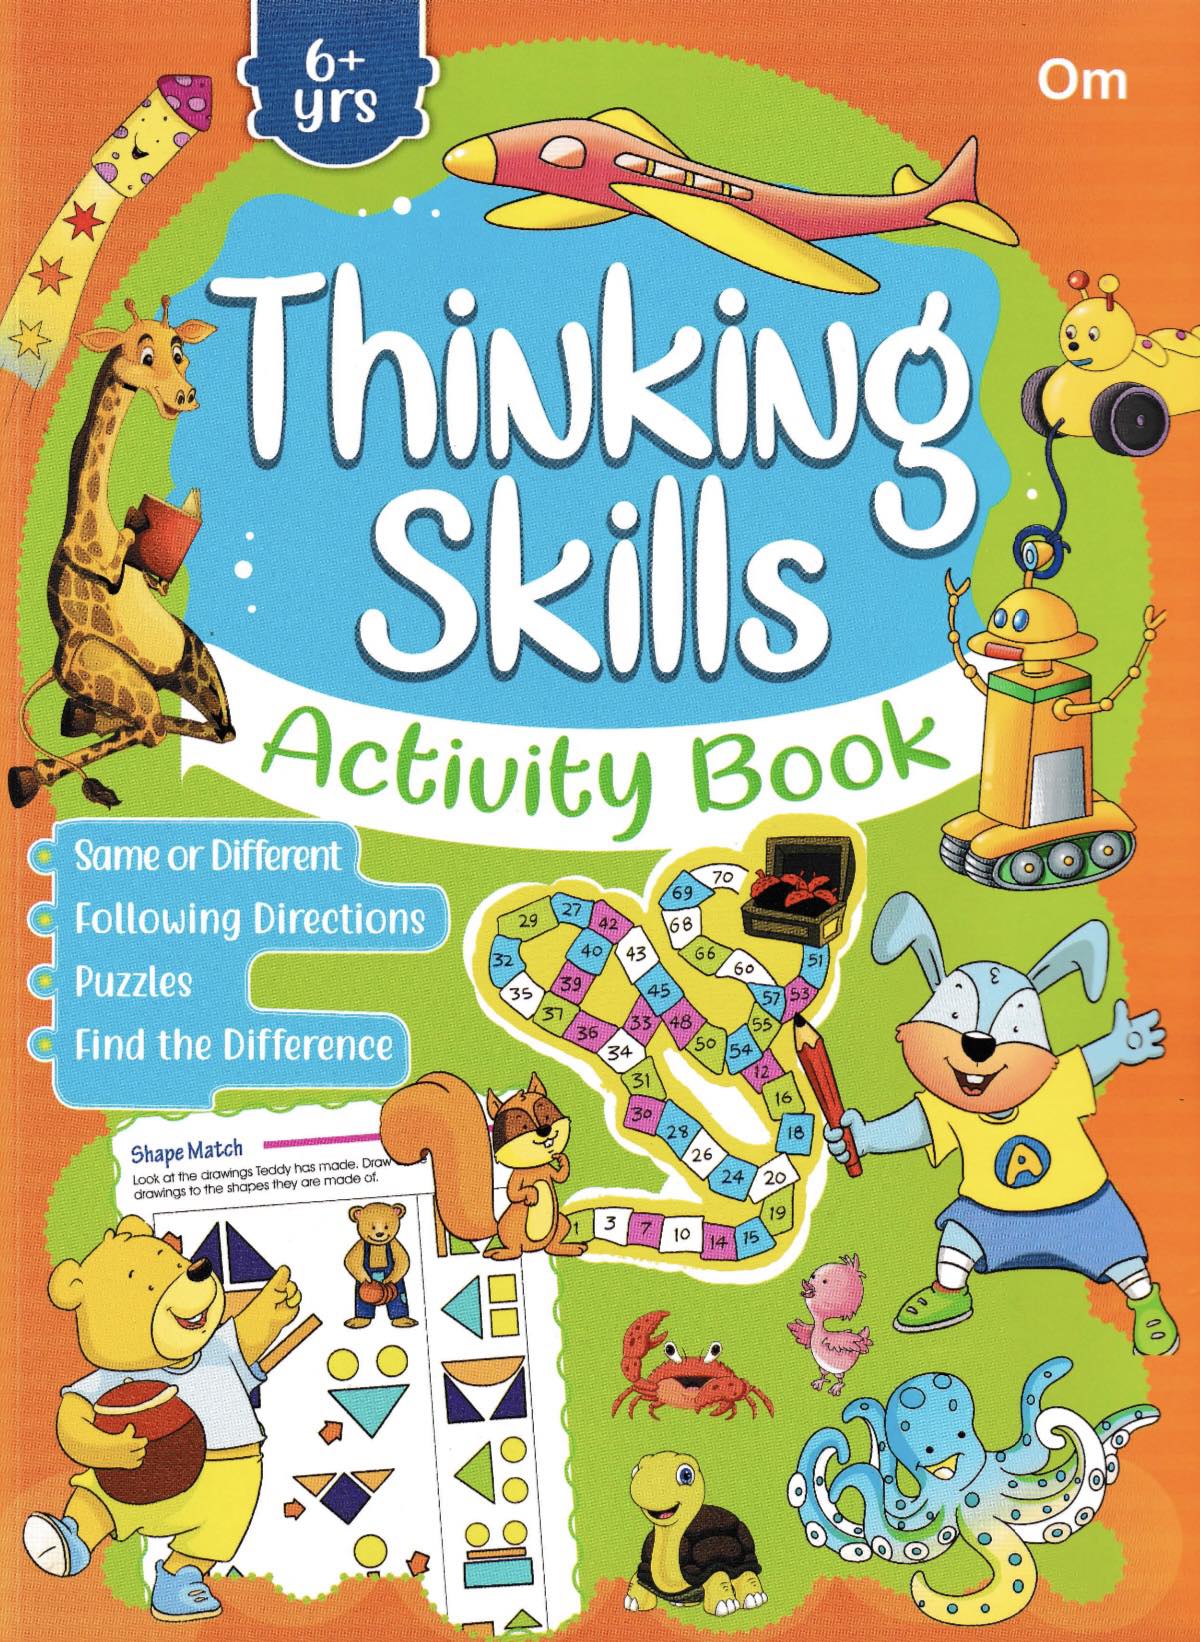 Thinking Skills Activity Book for Age 6+